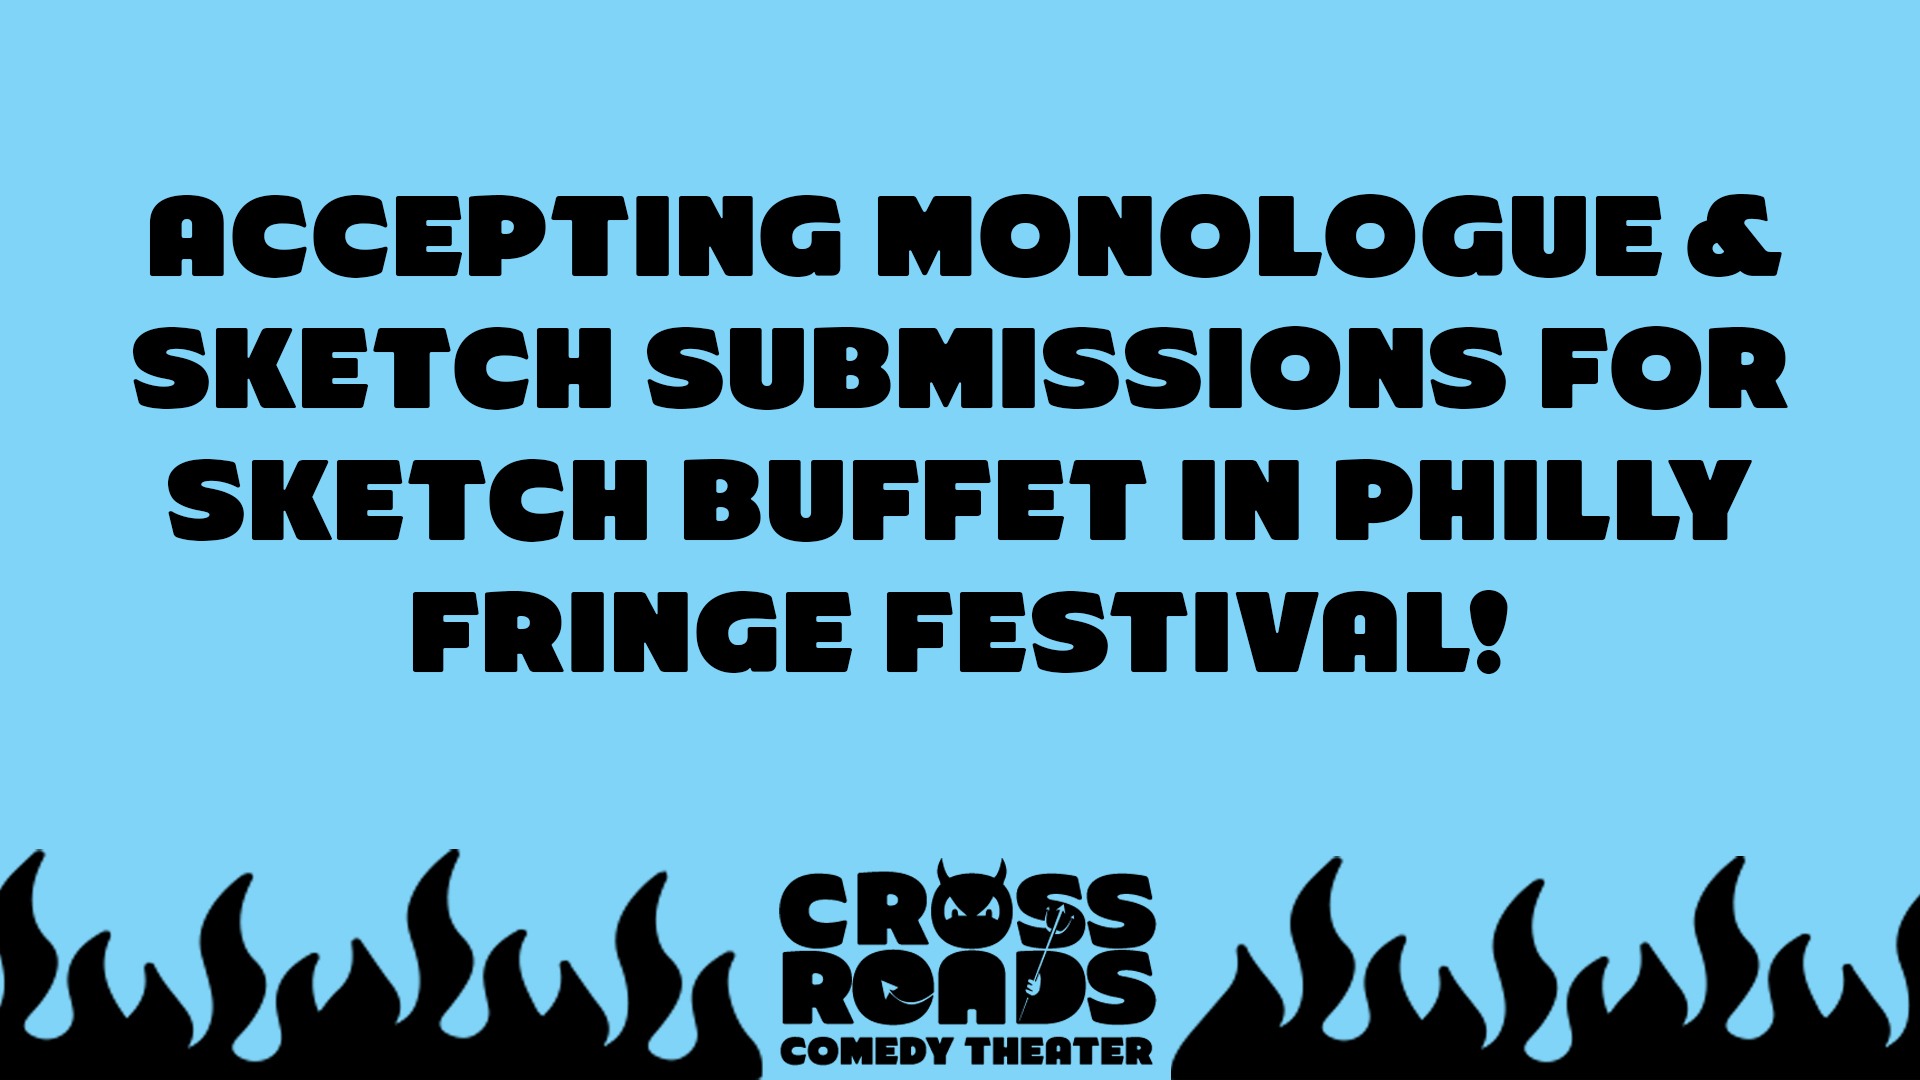 Accepting Submissions for Sketch Buffet in Philly Fringe Festival!